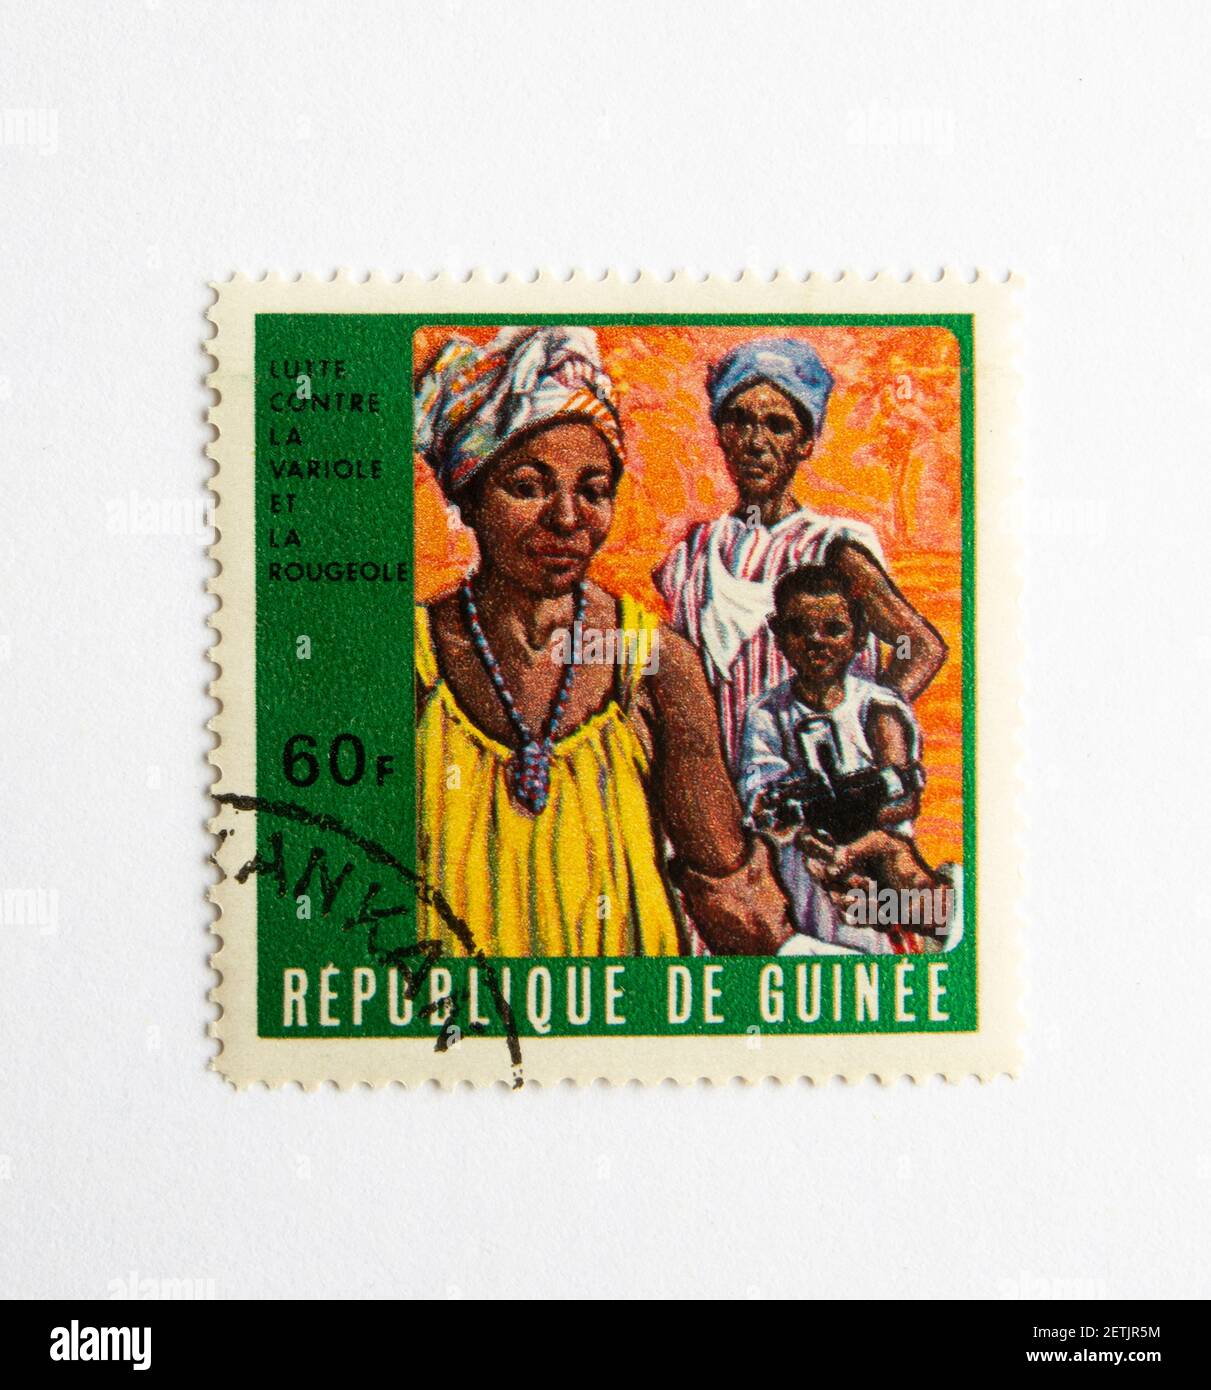 01.03.2021 Istanbul Turkey. Guinea Republic Postage Stamp. circa 1972. The fight for measles and smallpox control. vaccination woman Stock Photo